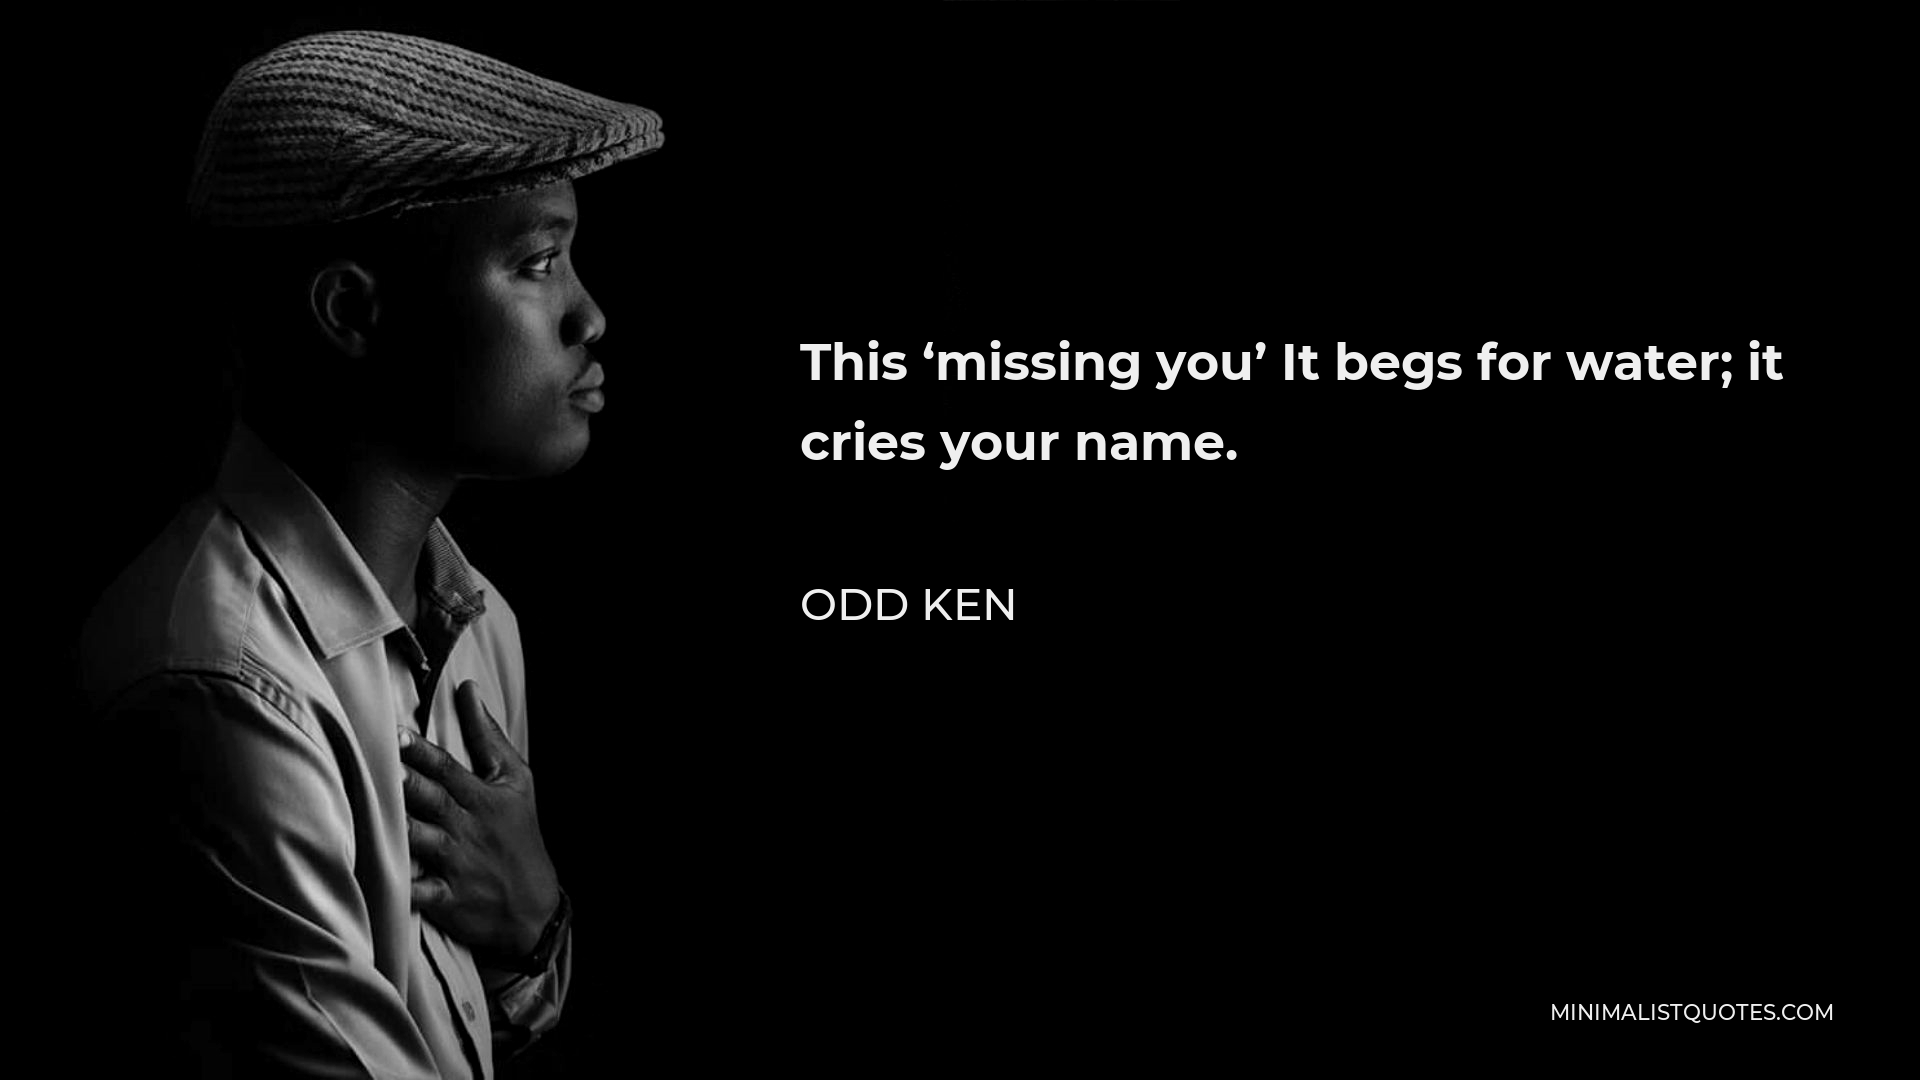 Odd Ken Quote - This ‘missing you’ It begs for water; it cries your name.